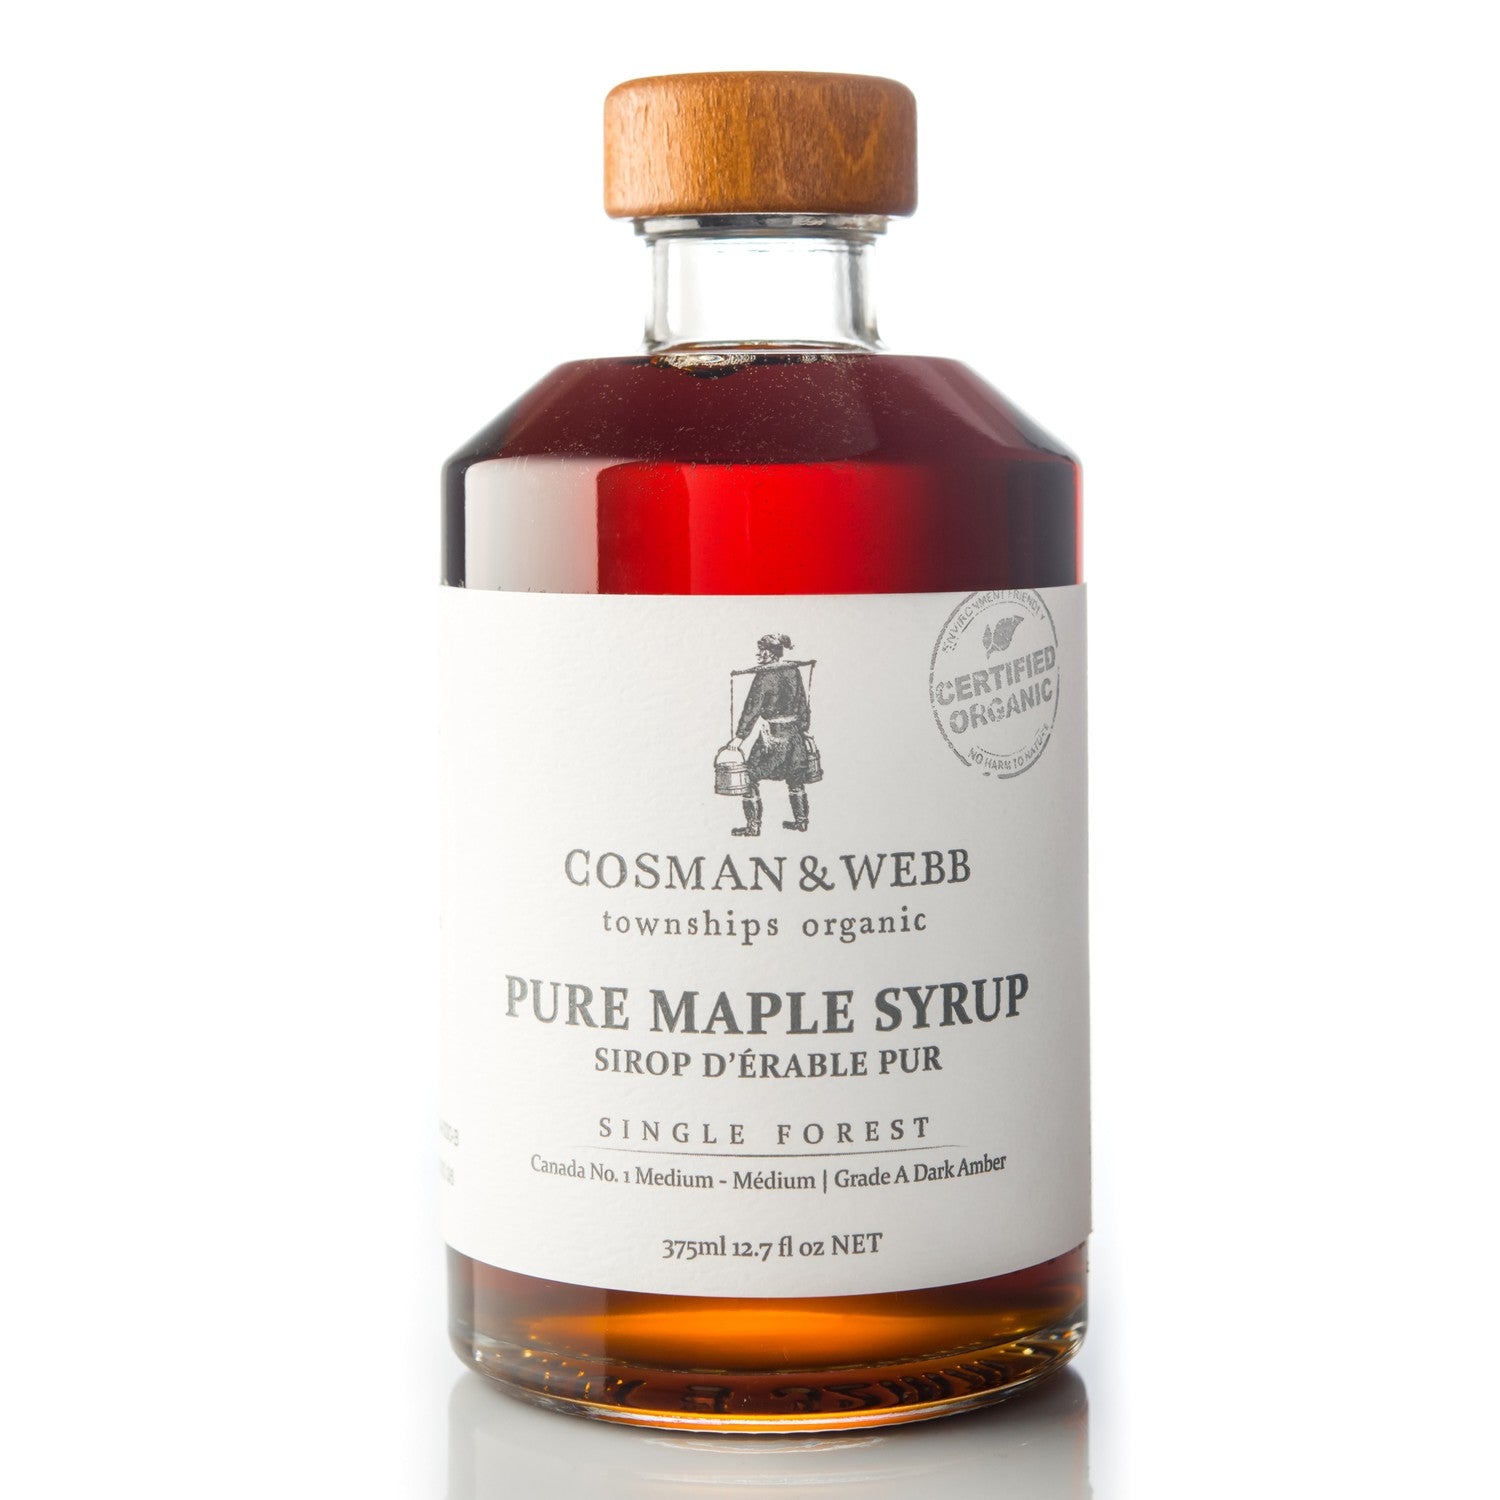 Gorgeous maple syrup from Quebec 250 ml